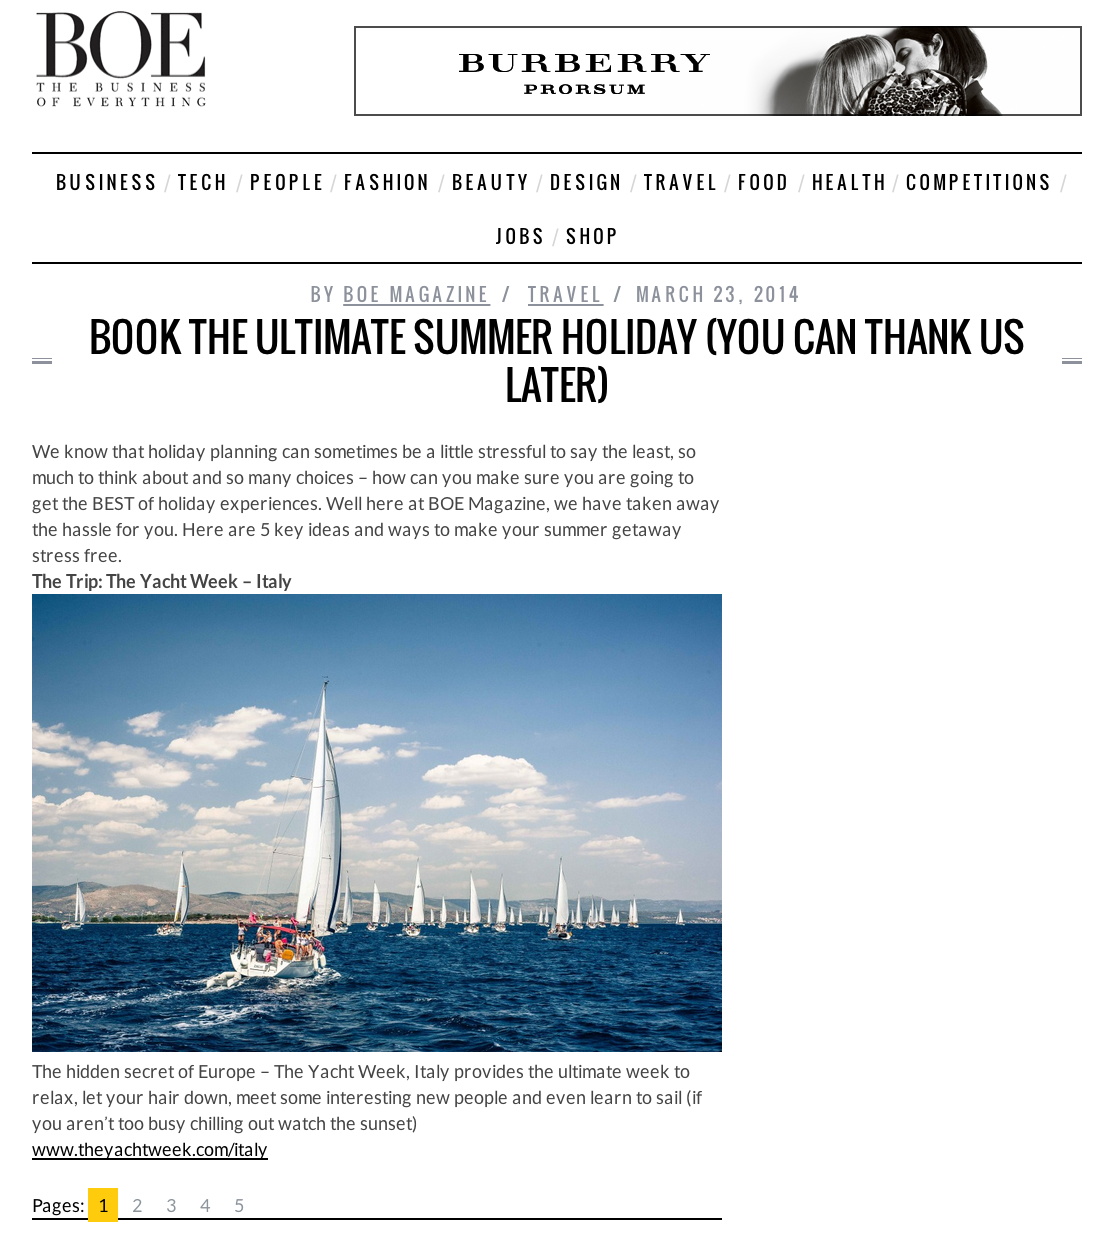 BOE Magazine is featuring The Yacht Week